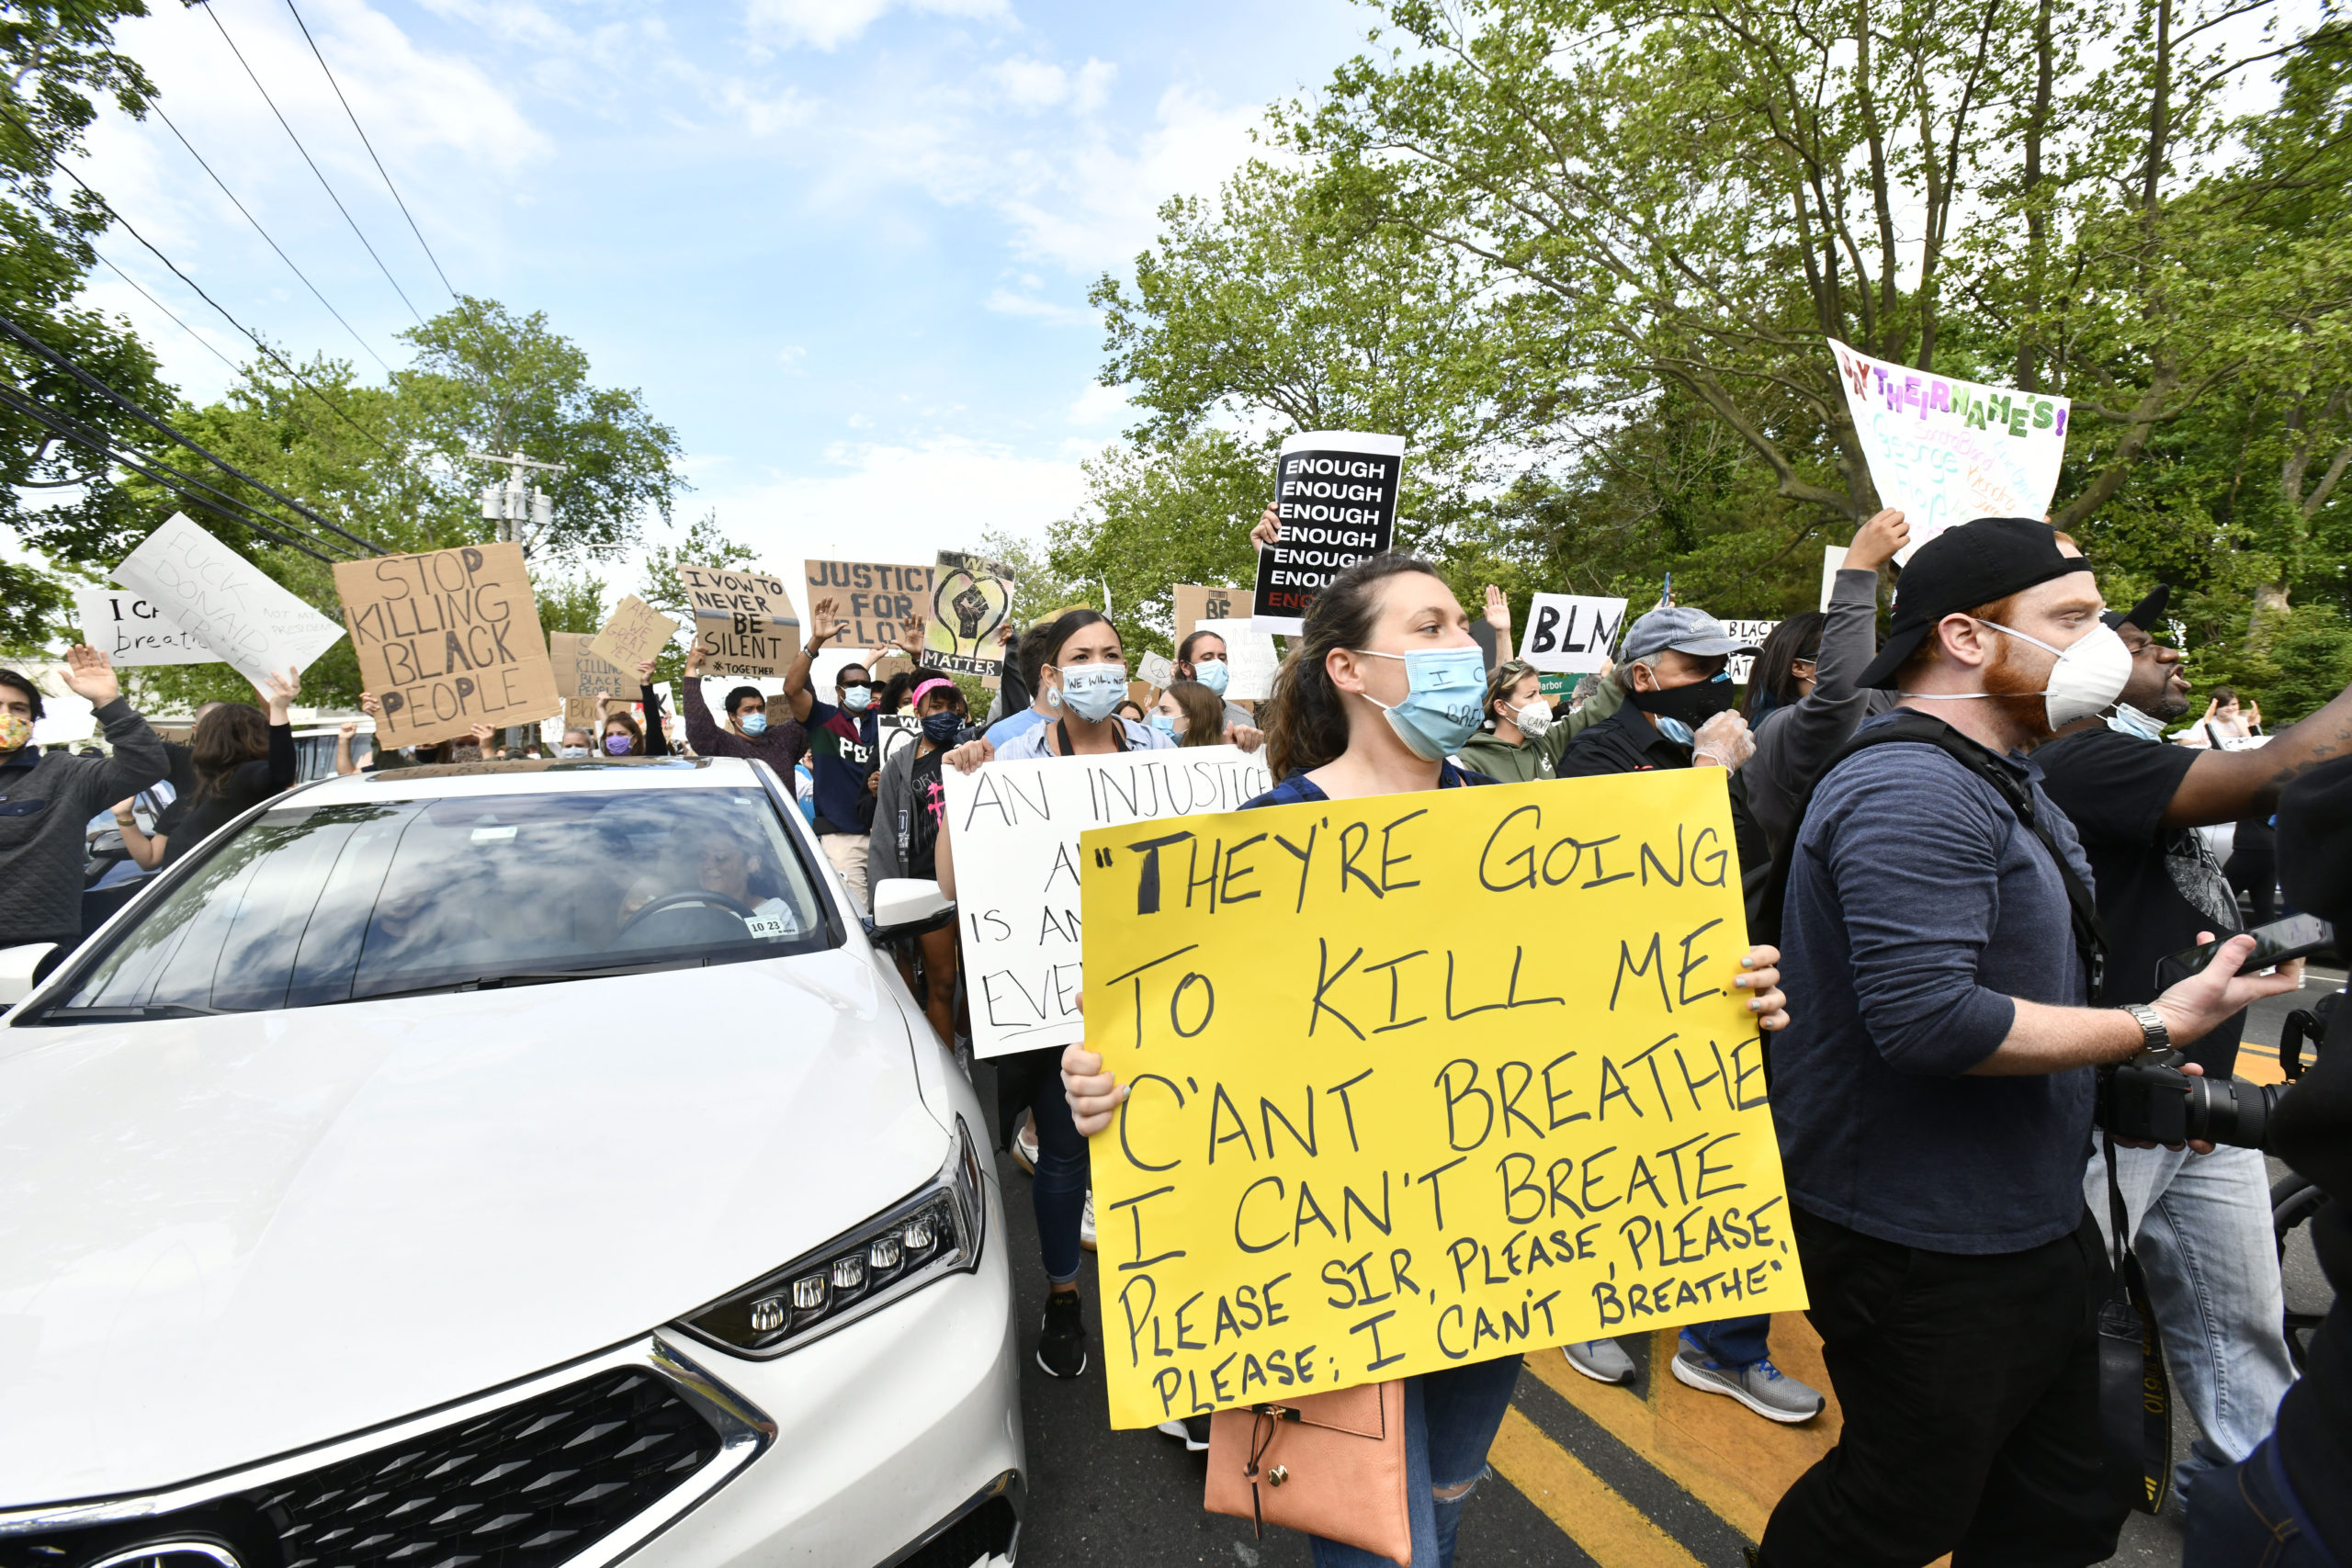 Hundreds of people gathered in Bridgehampton on Tuesday evening to protest the death of George Floyd.